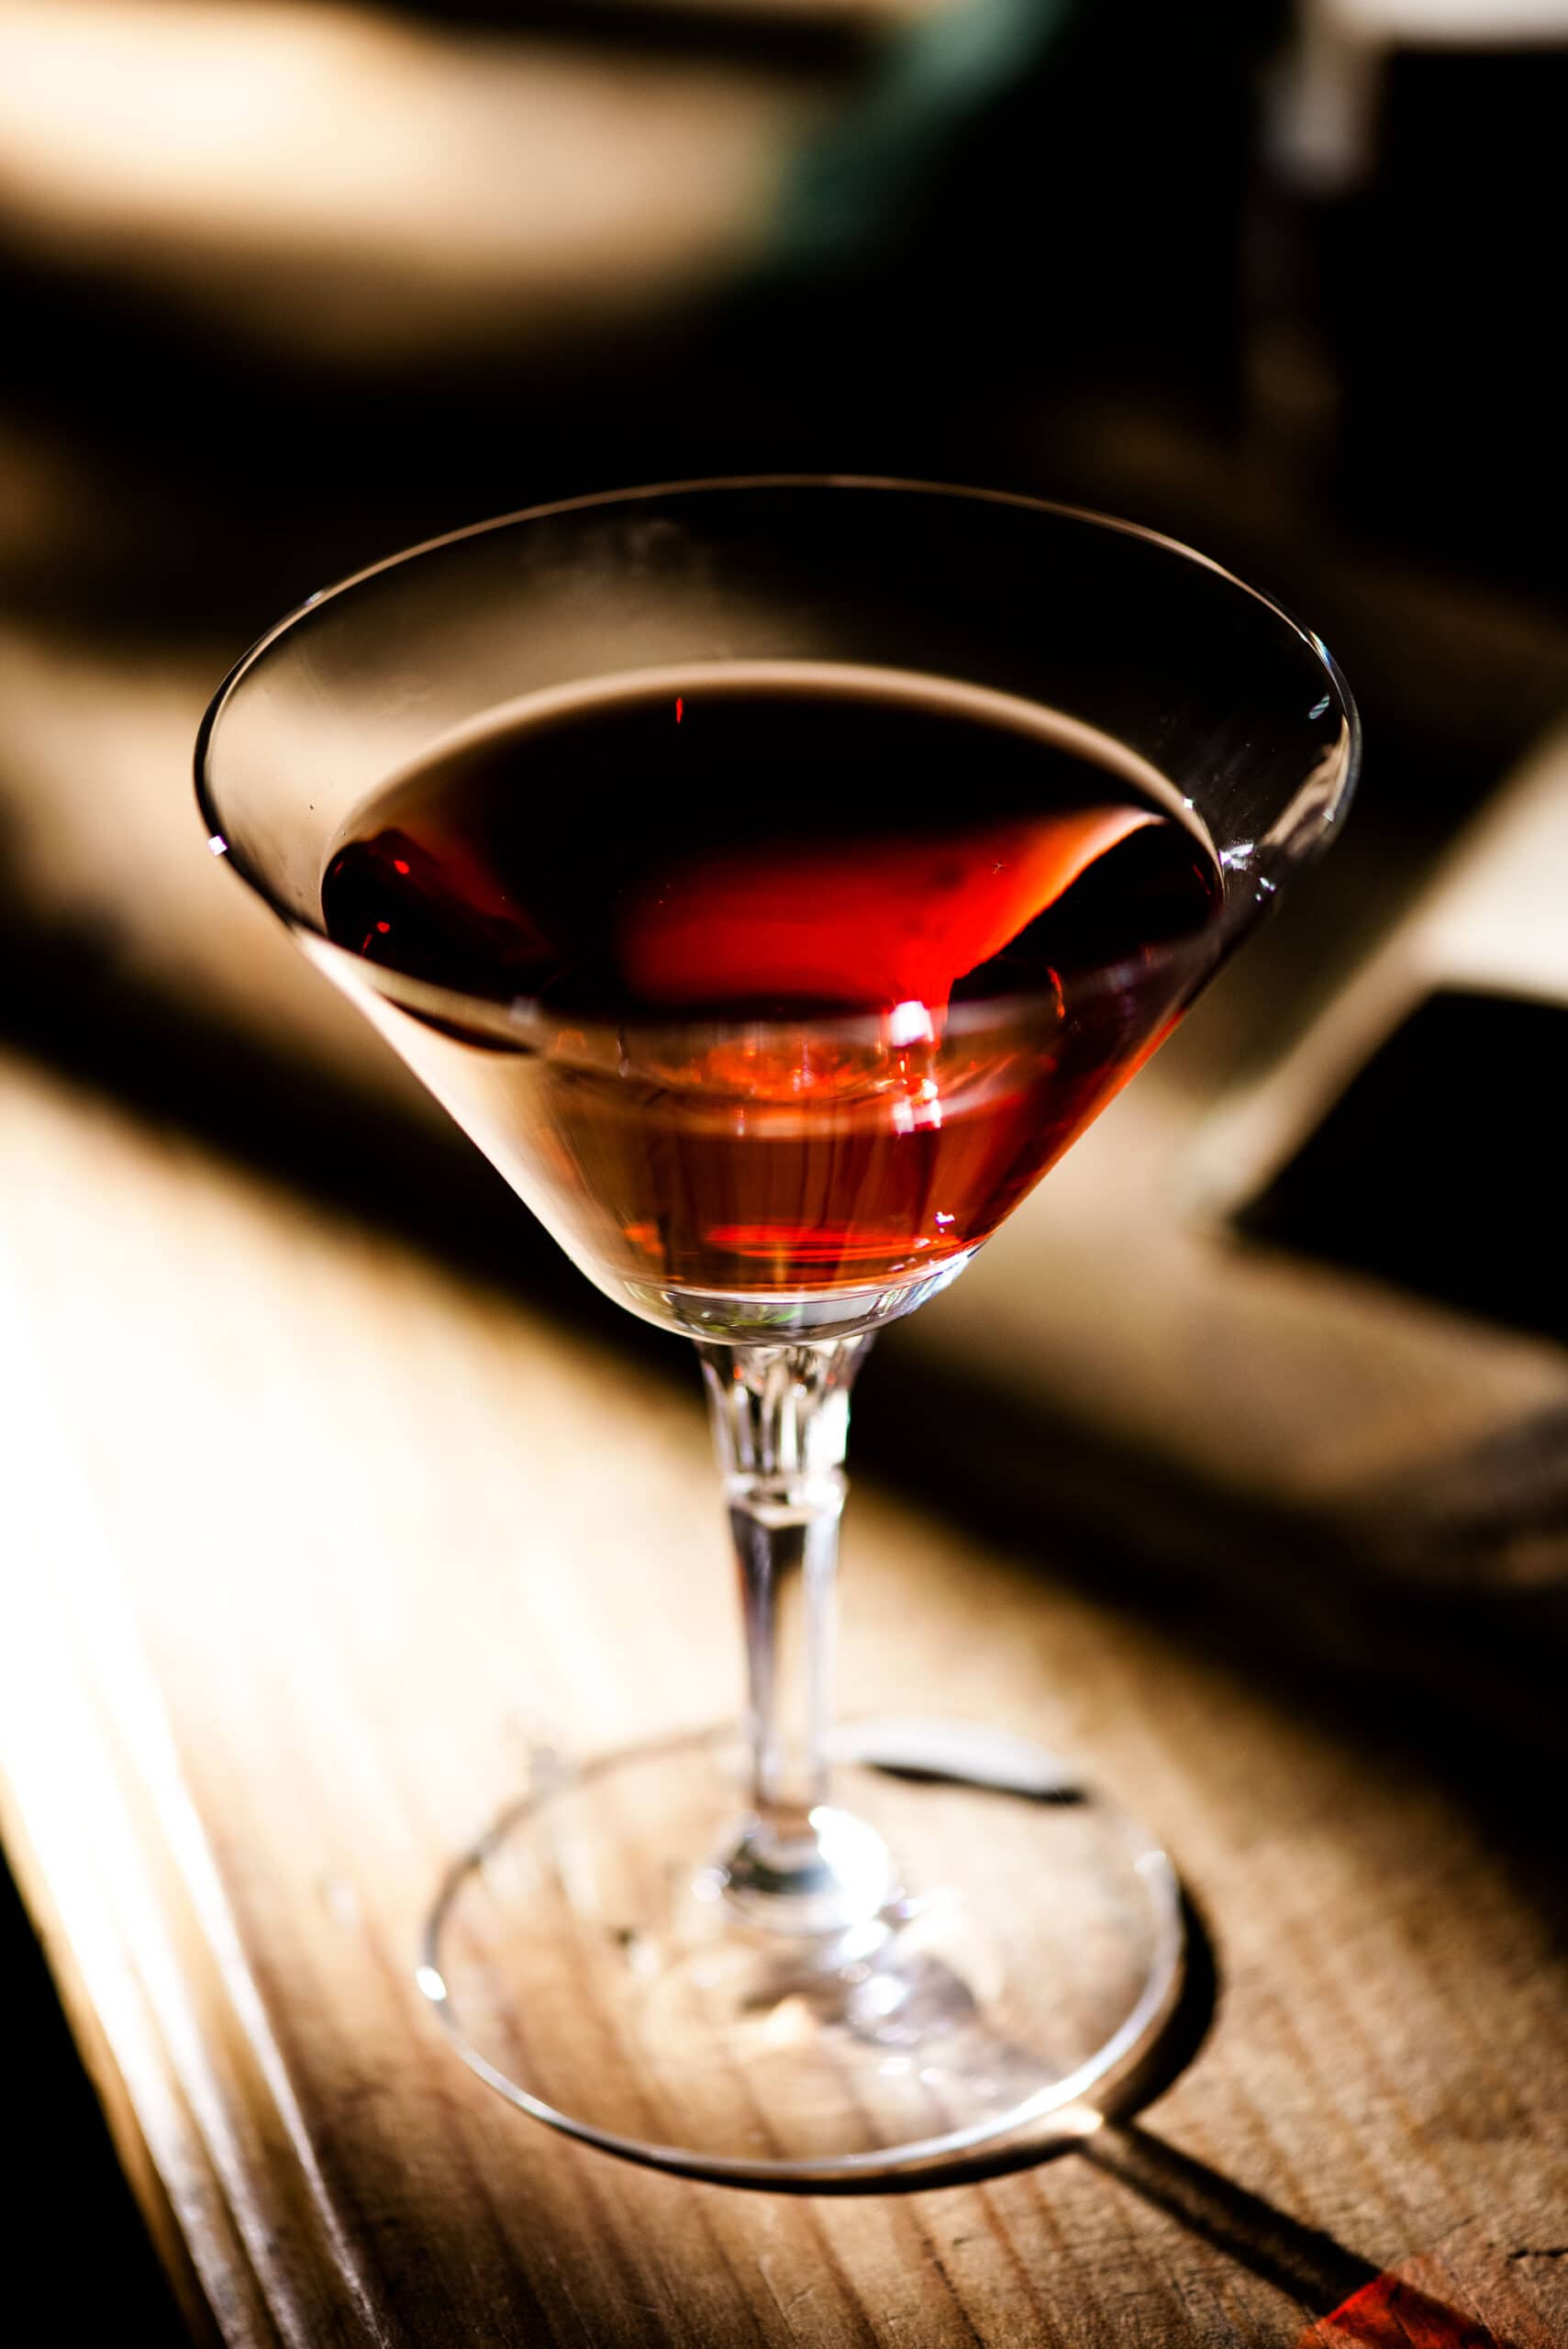 Single glass with red drink on a wooden table